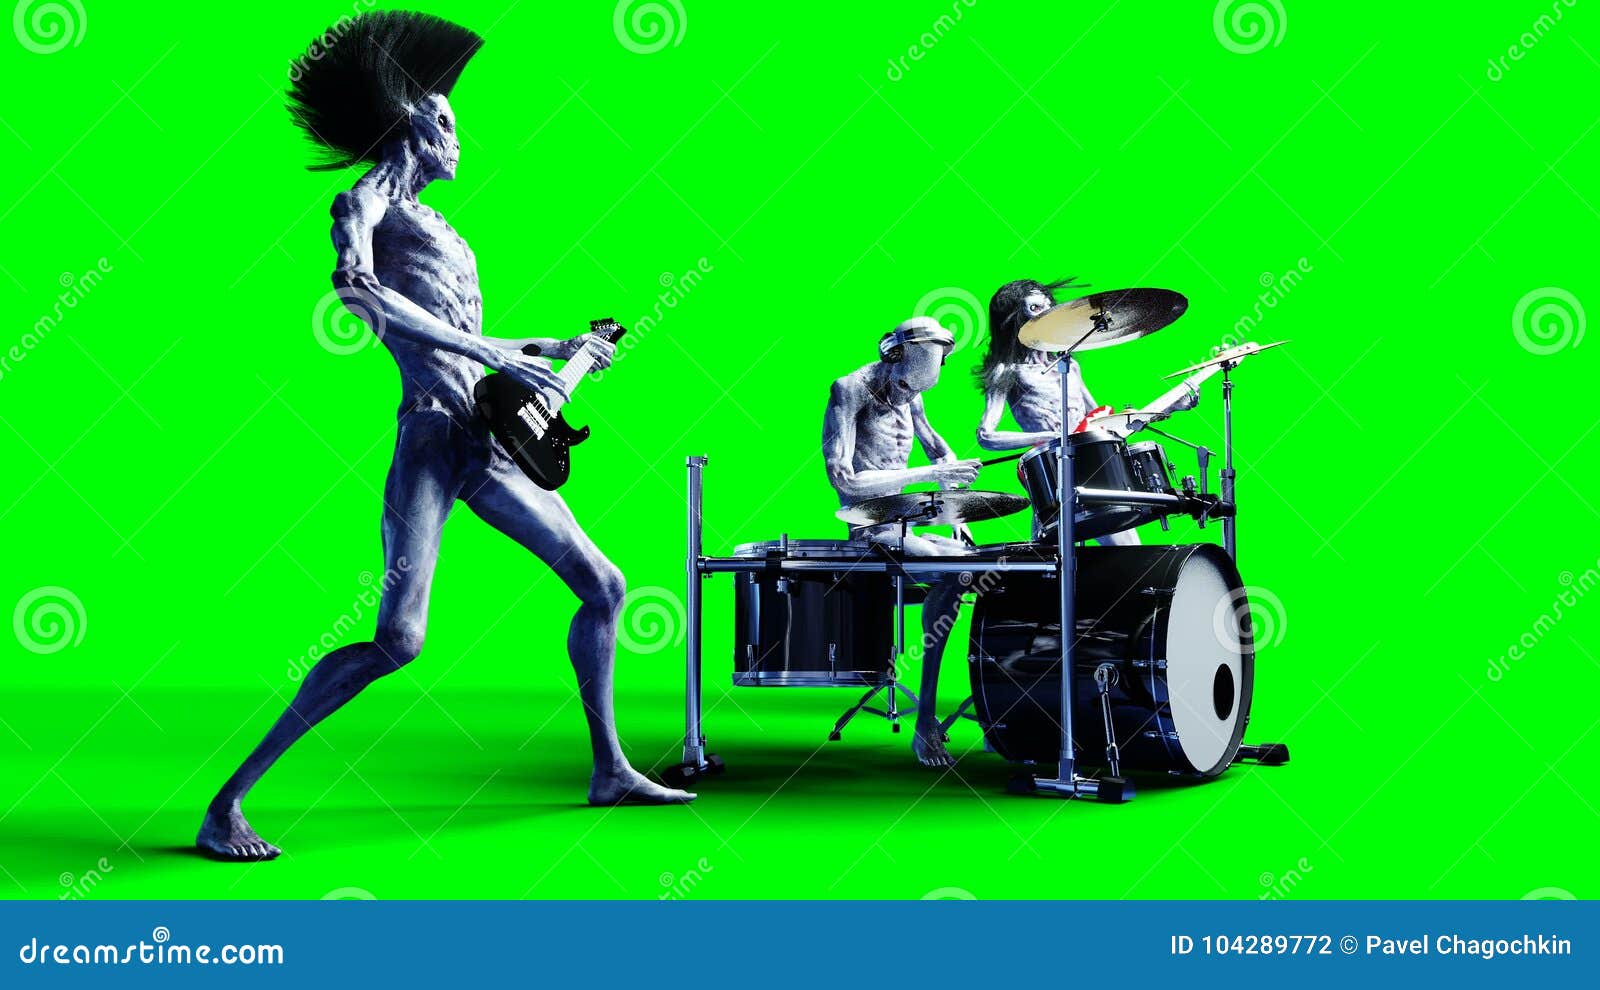 Funny Alien Rock Band. Bass, Drum, Guitar. Realistic Motion and Skin  Shaders. 4K Green Screen Footage. Stock Footage - Video of futuristic,  aliens: 104289772